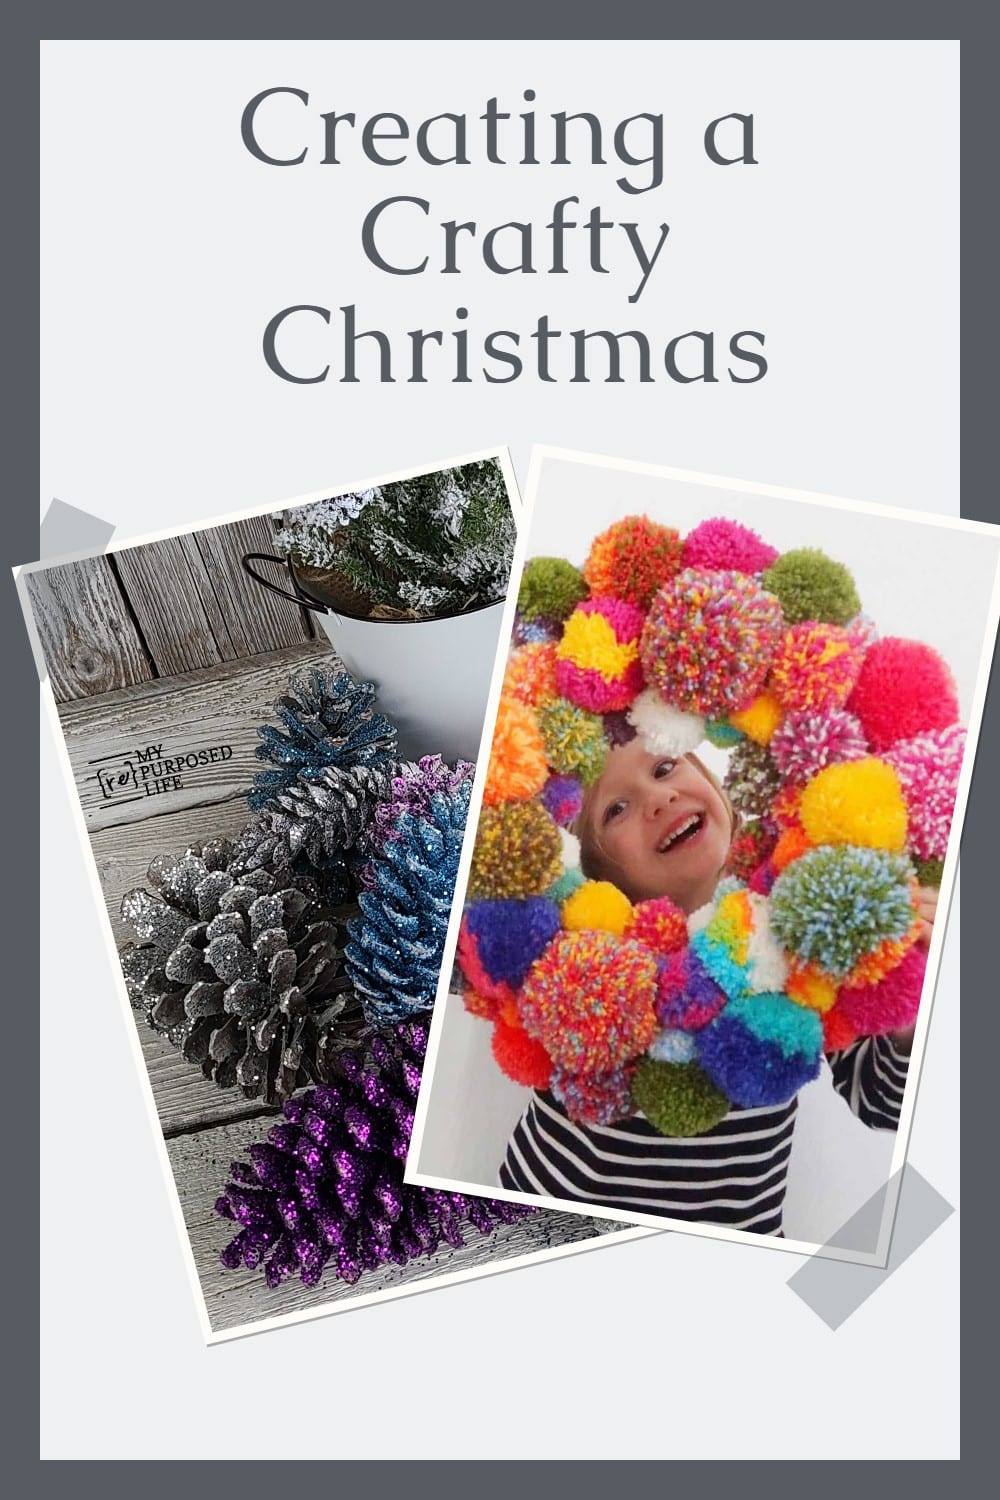 Make it a homemade crafty Christmas. Christmas projects for all skill levels from beginner to to intermediate. Something for everyone. via @repurposedlife